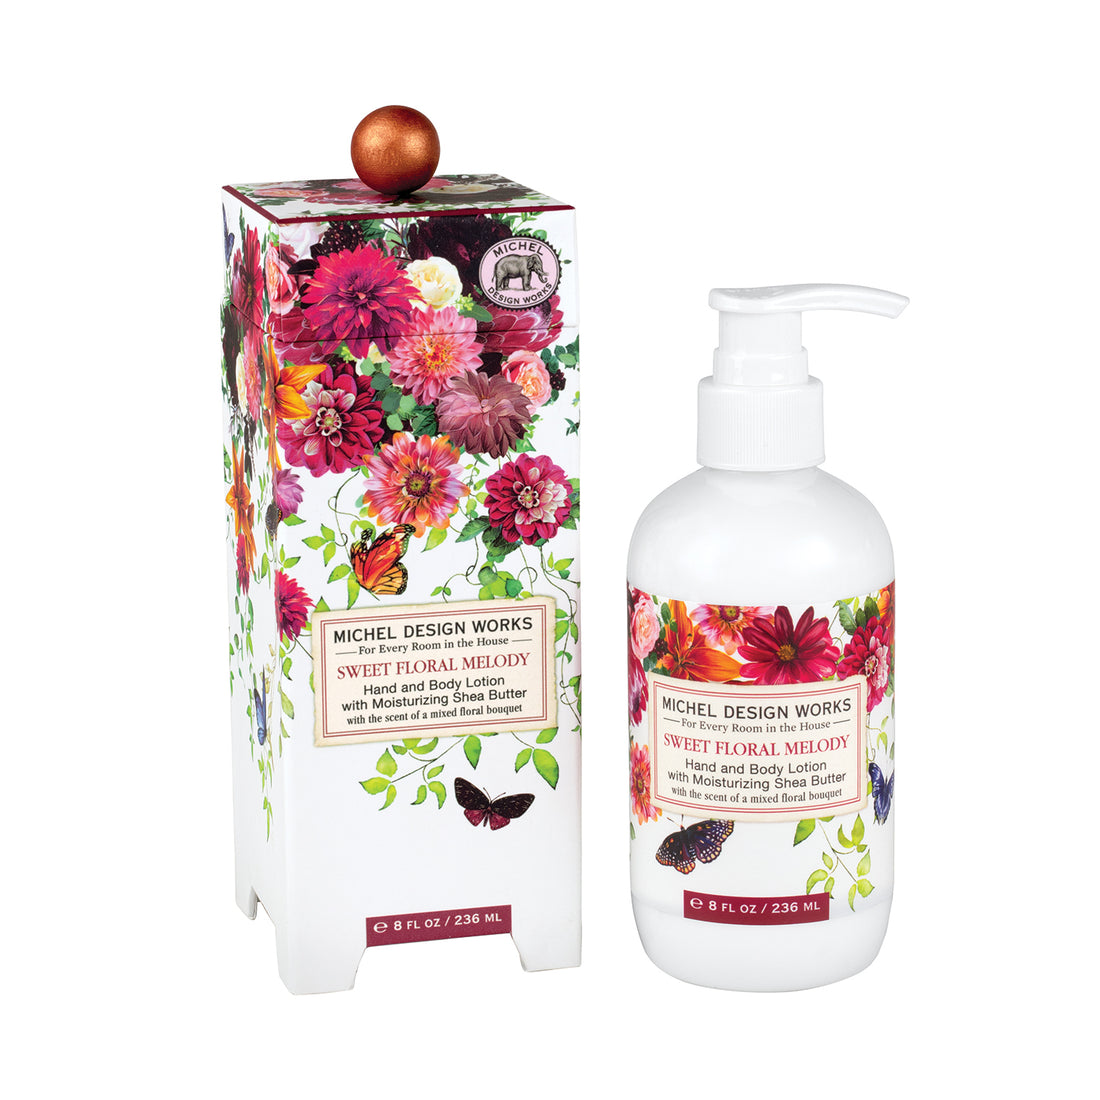 Michel Design Works - Sweet Floral Melody (Hand and Body Lotion)